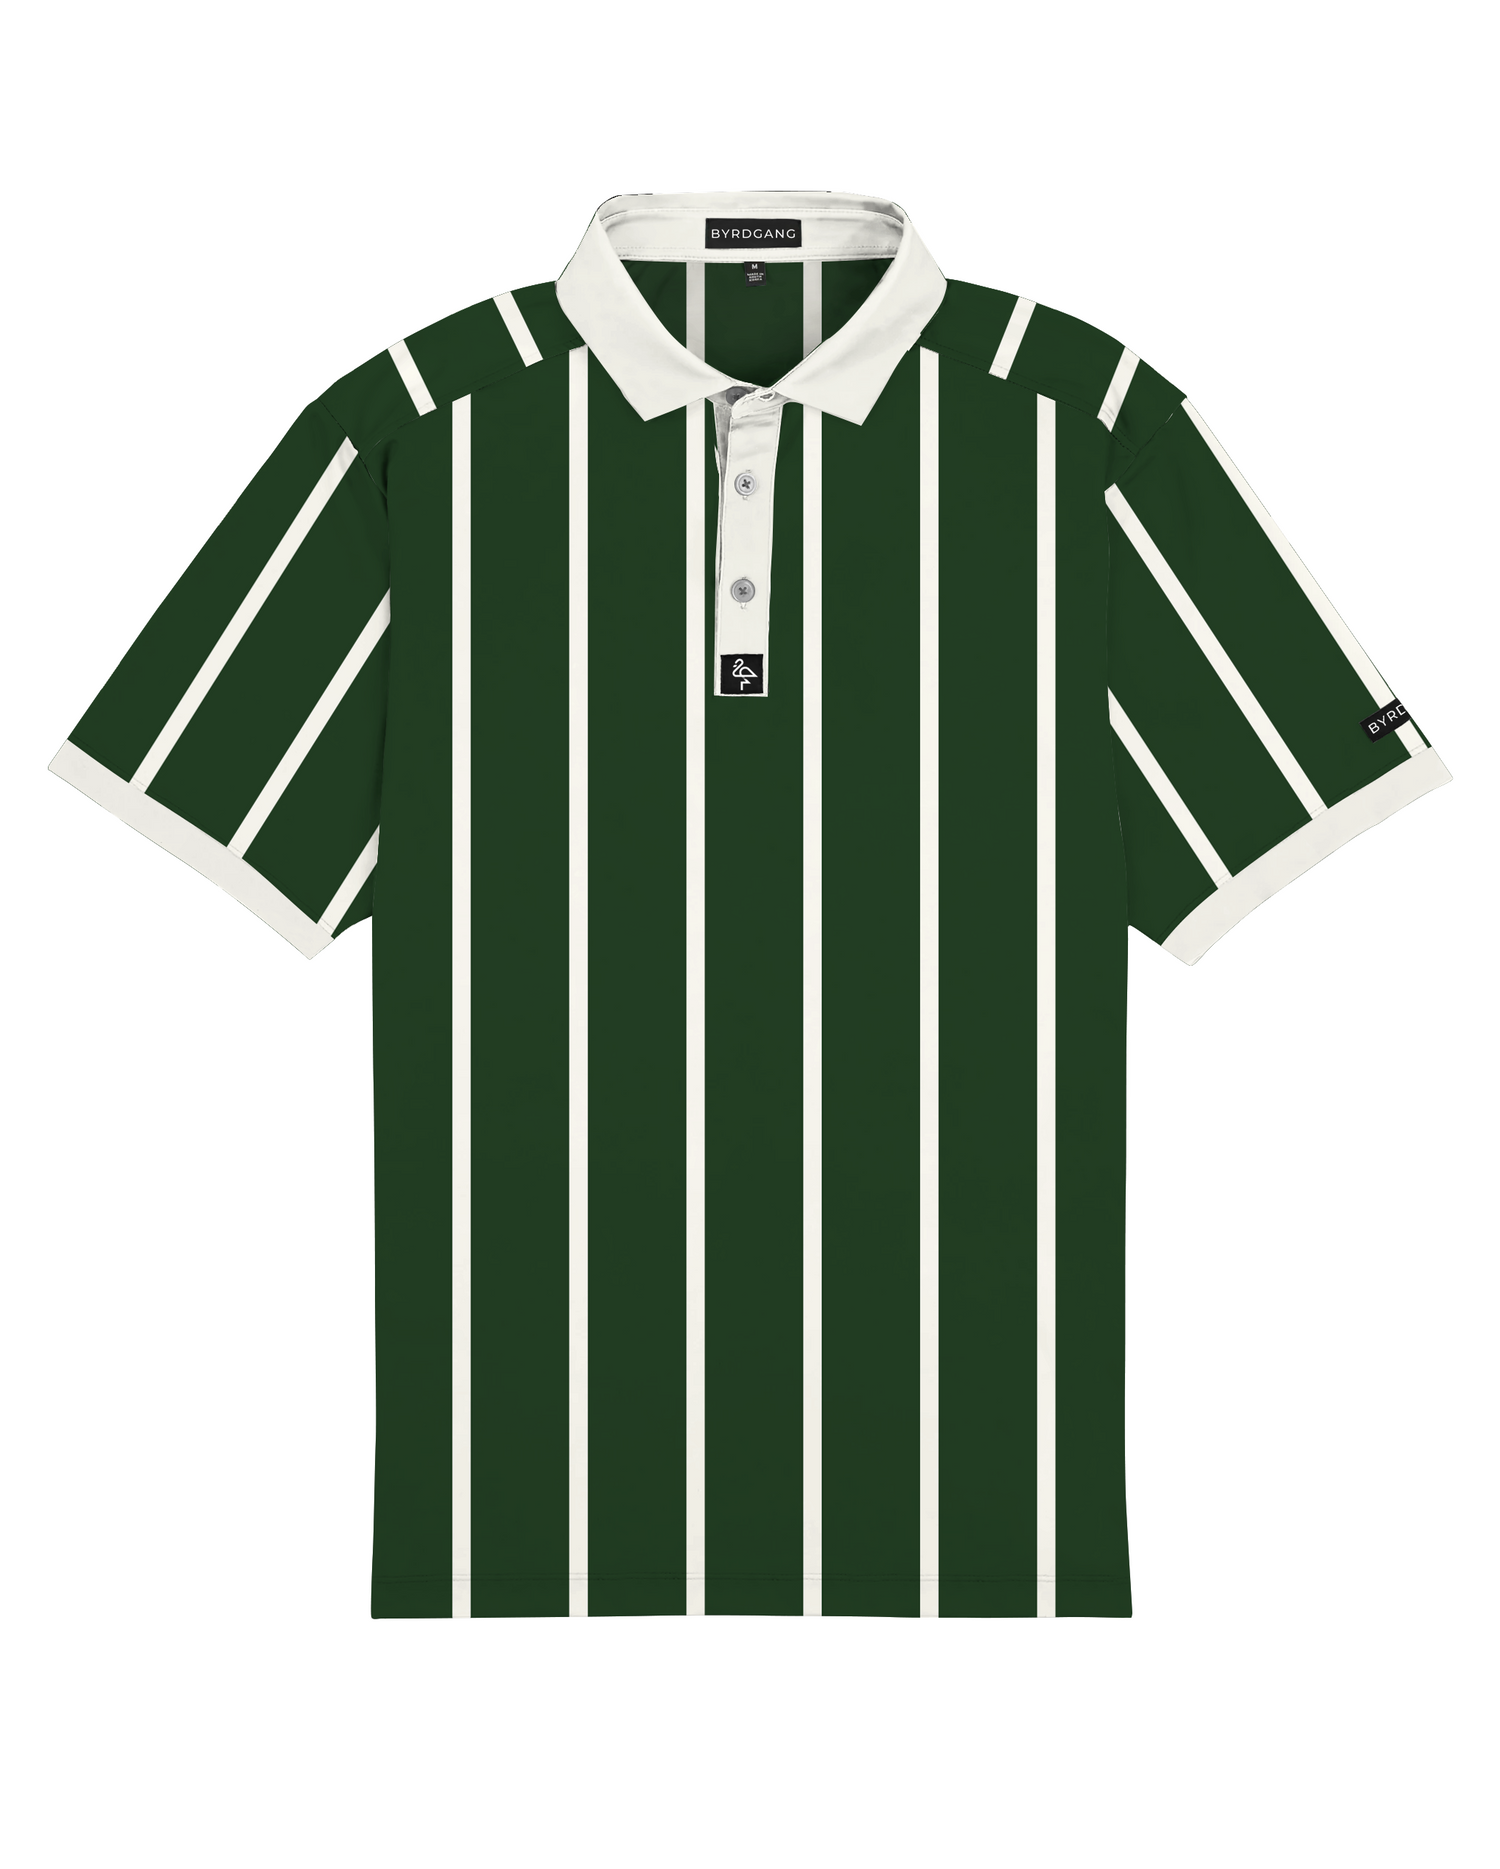 Old Stripes - Green